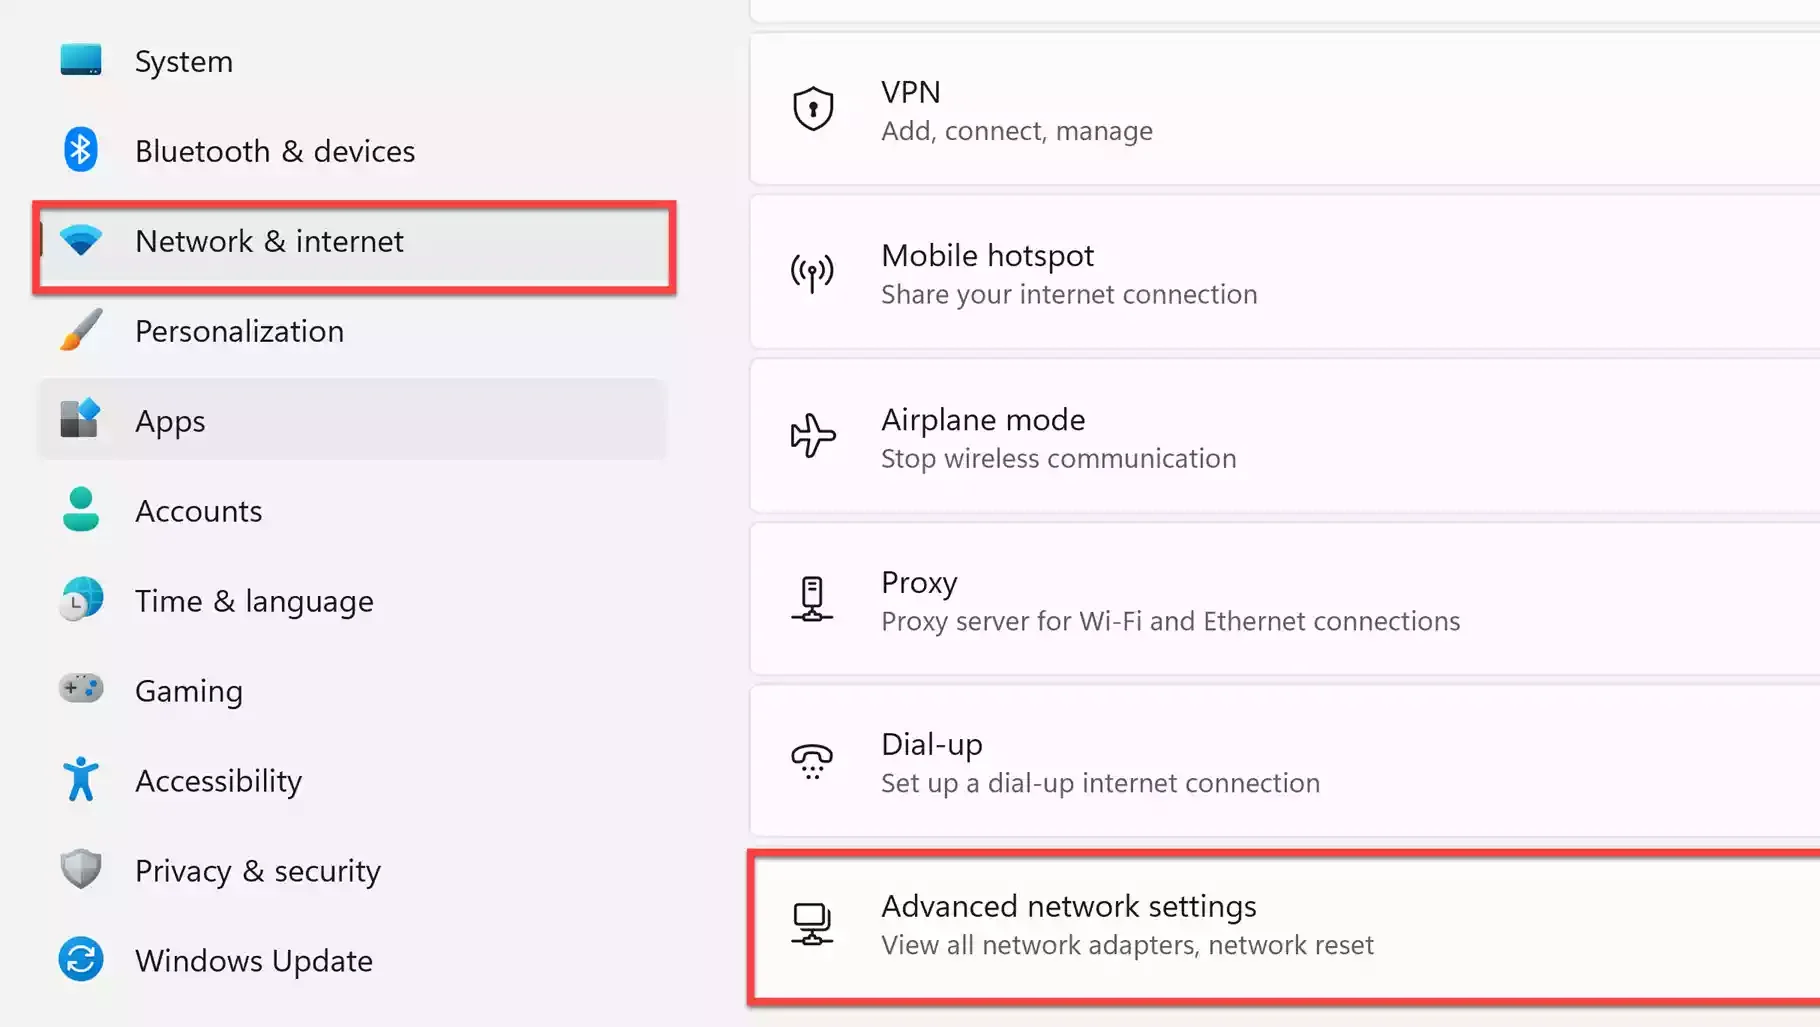 Go to Network & internet and select Advanced network settings in the Settings app